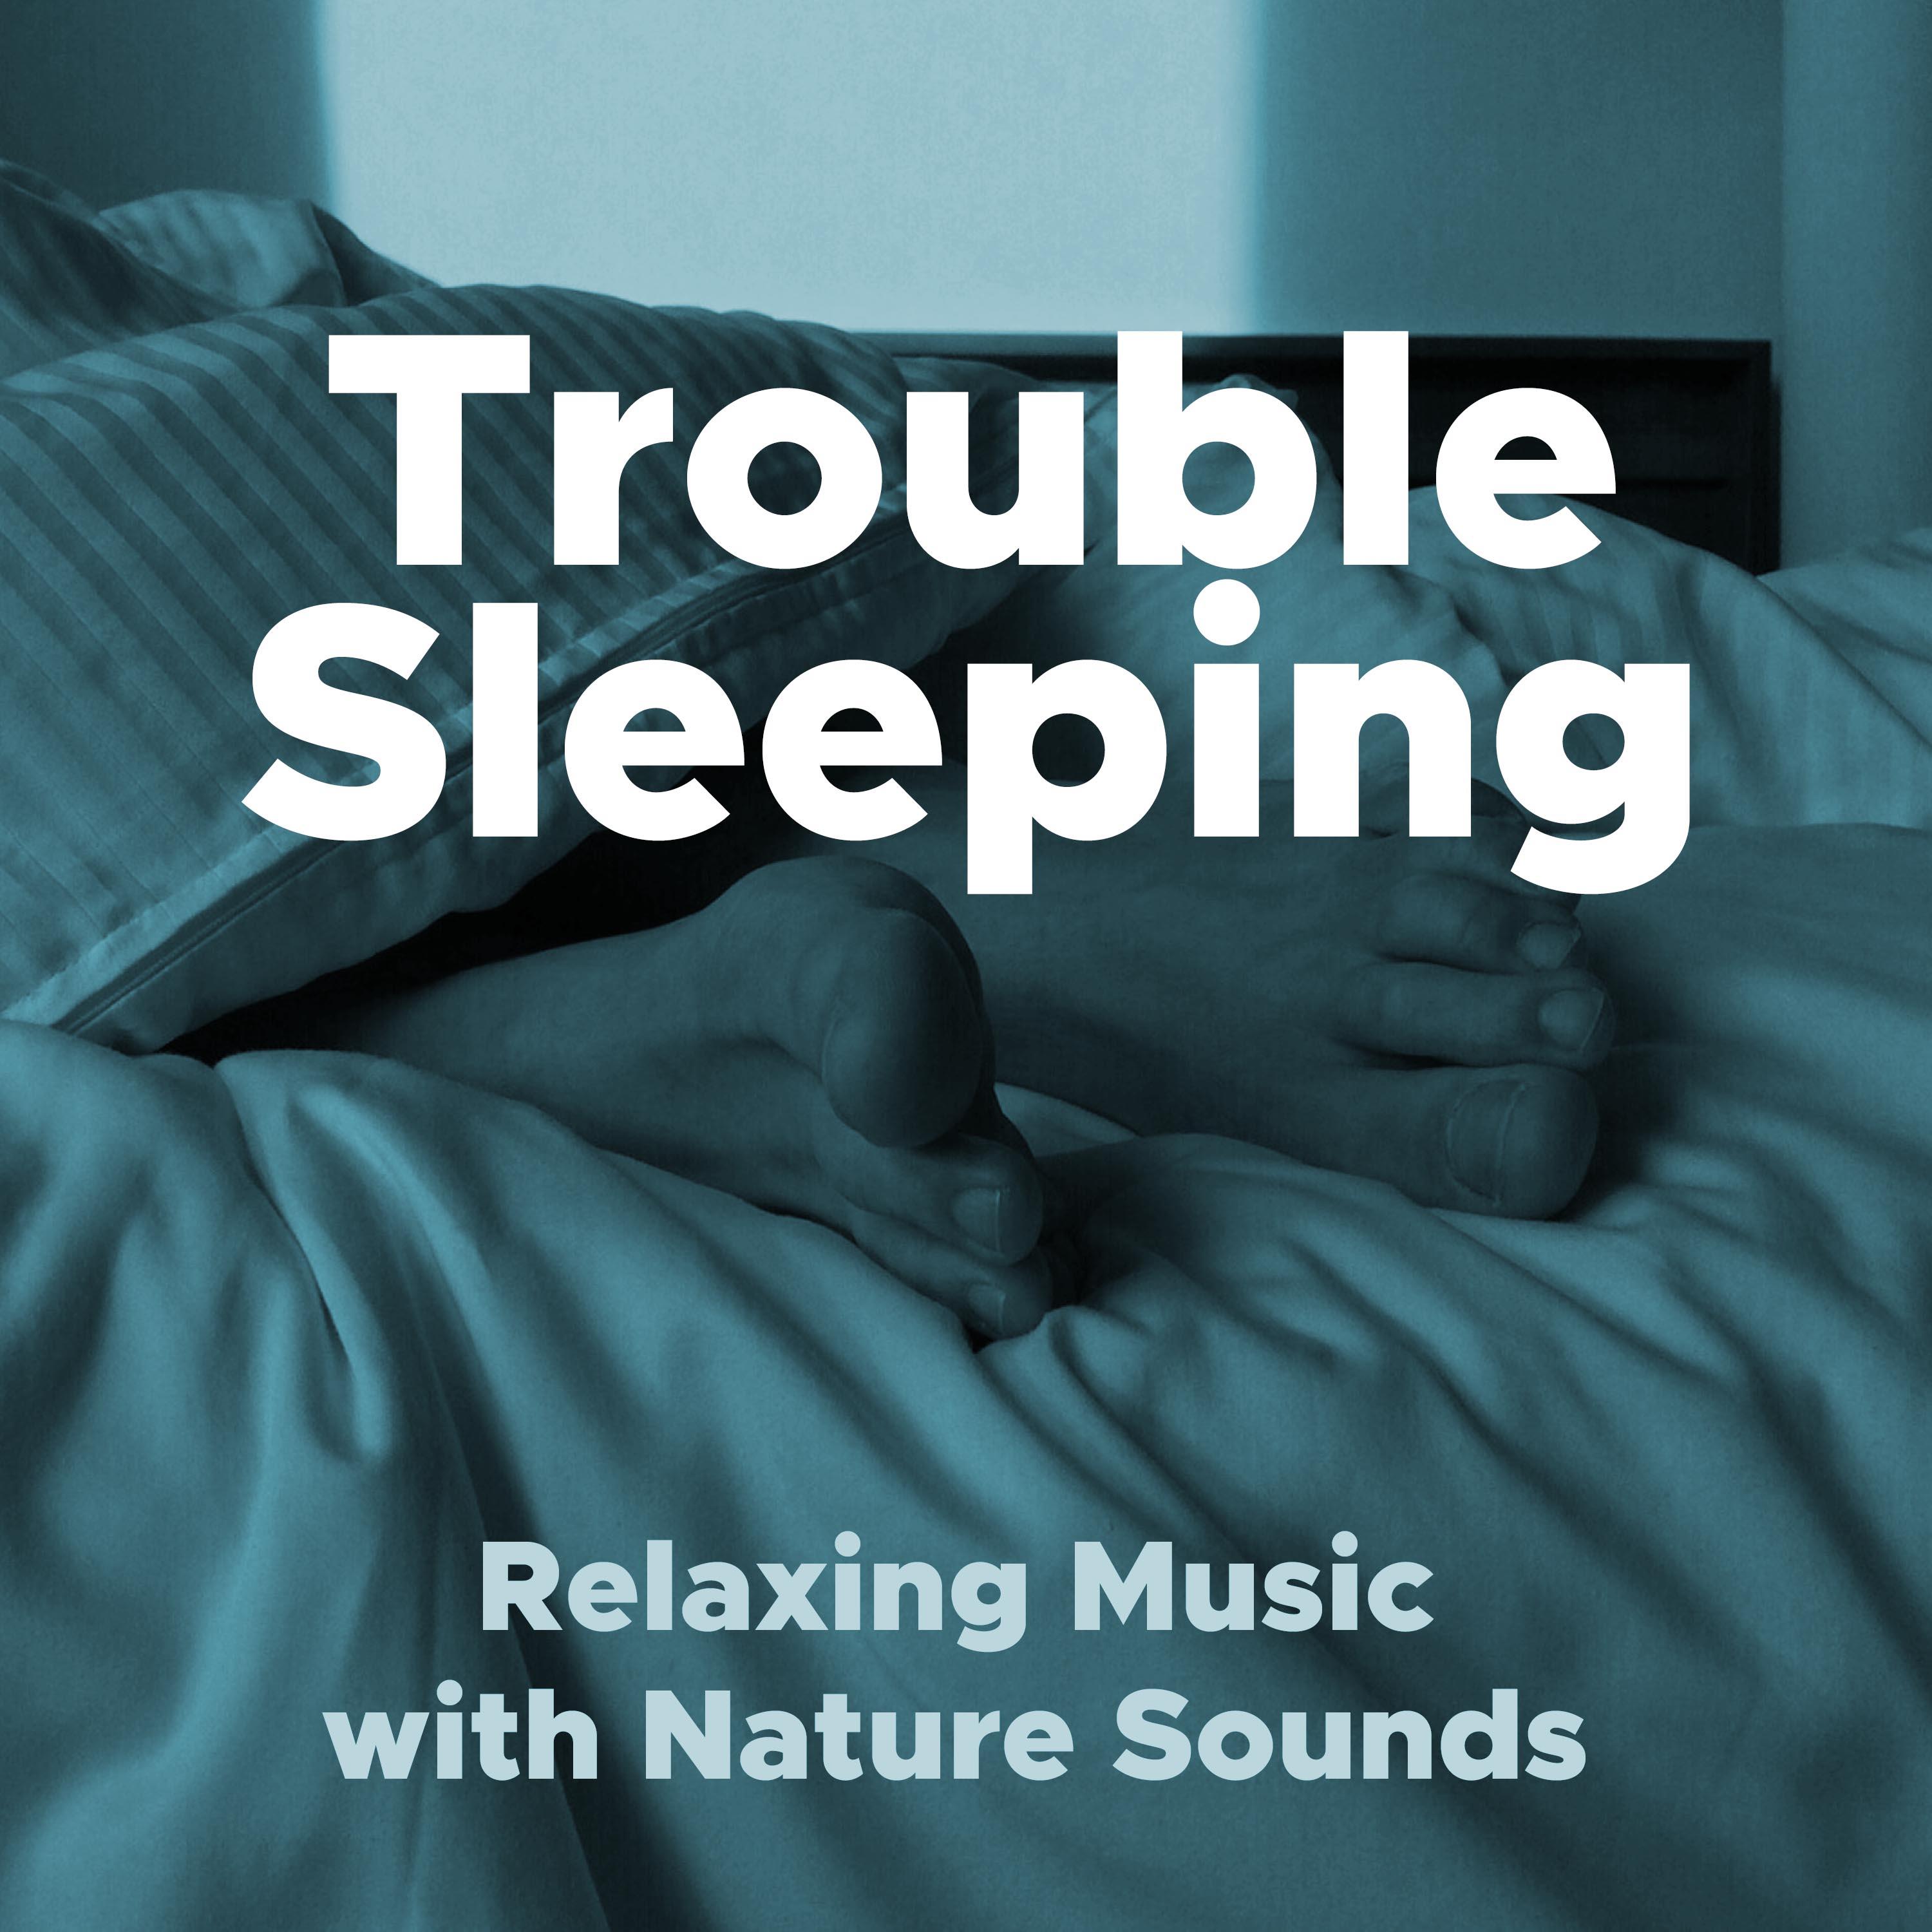 Trouble Sleeping- Relaxing Music with Nature Sounds (Rain, Ocean Waves, Sirens)